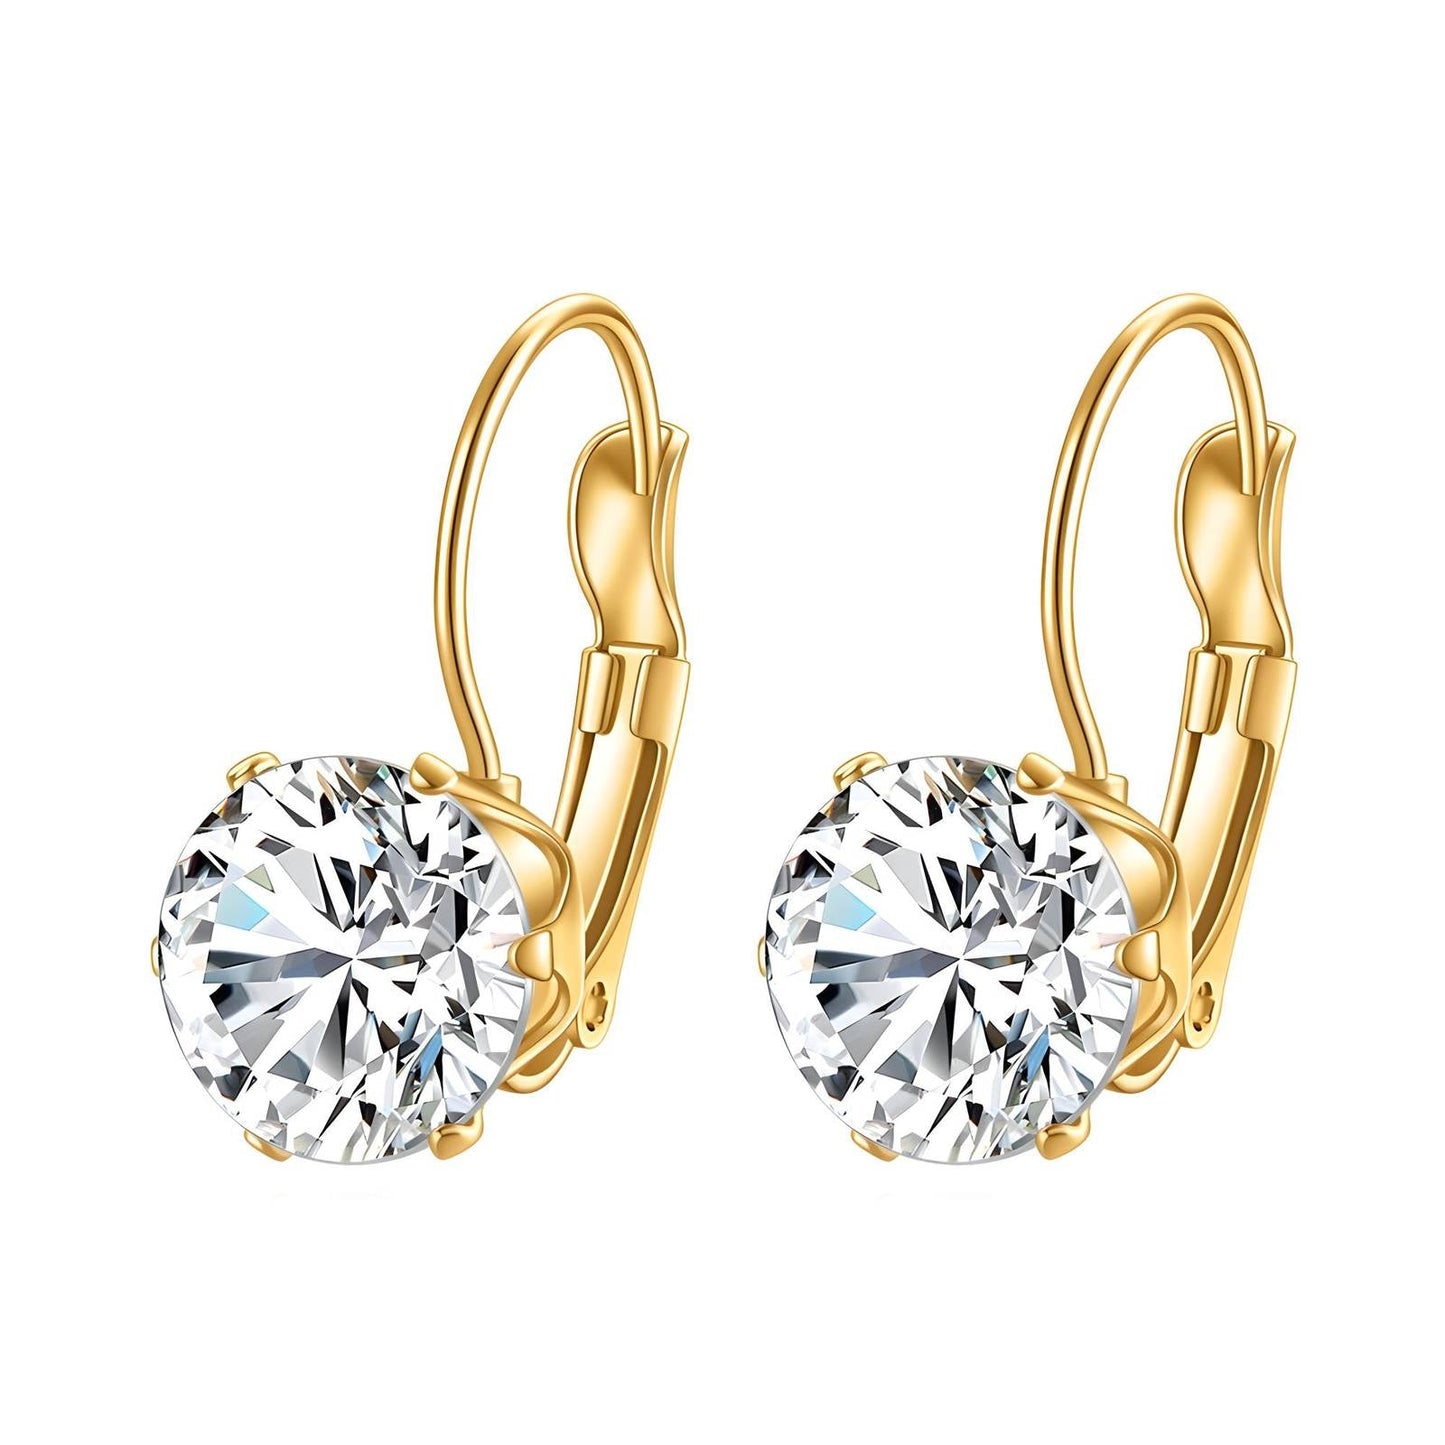 Bright bling earrings - Gold Plated Tarnish Free Jewellery